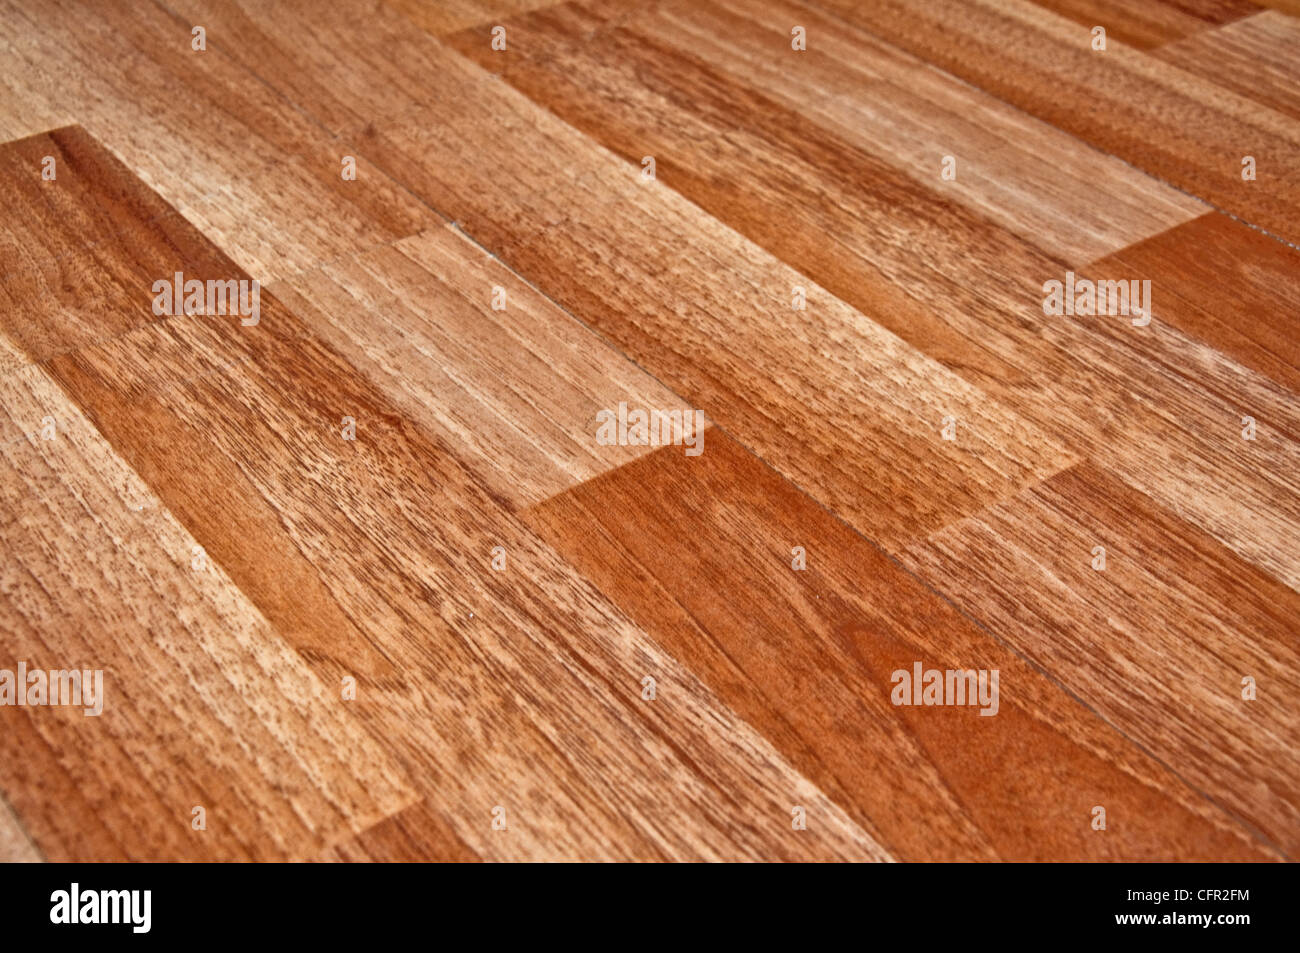 Close up detail of a beautiful wooden brown laminated floor Stock Photo